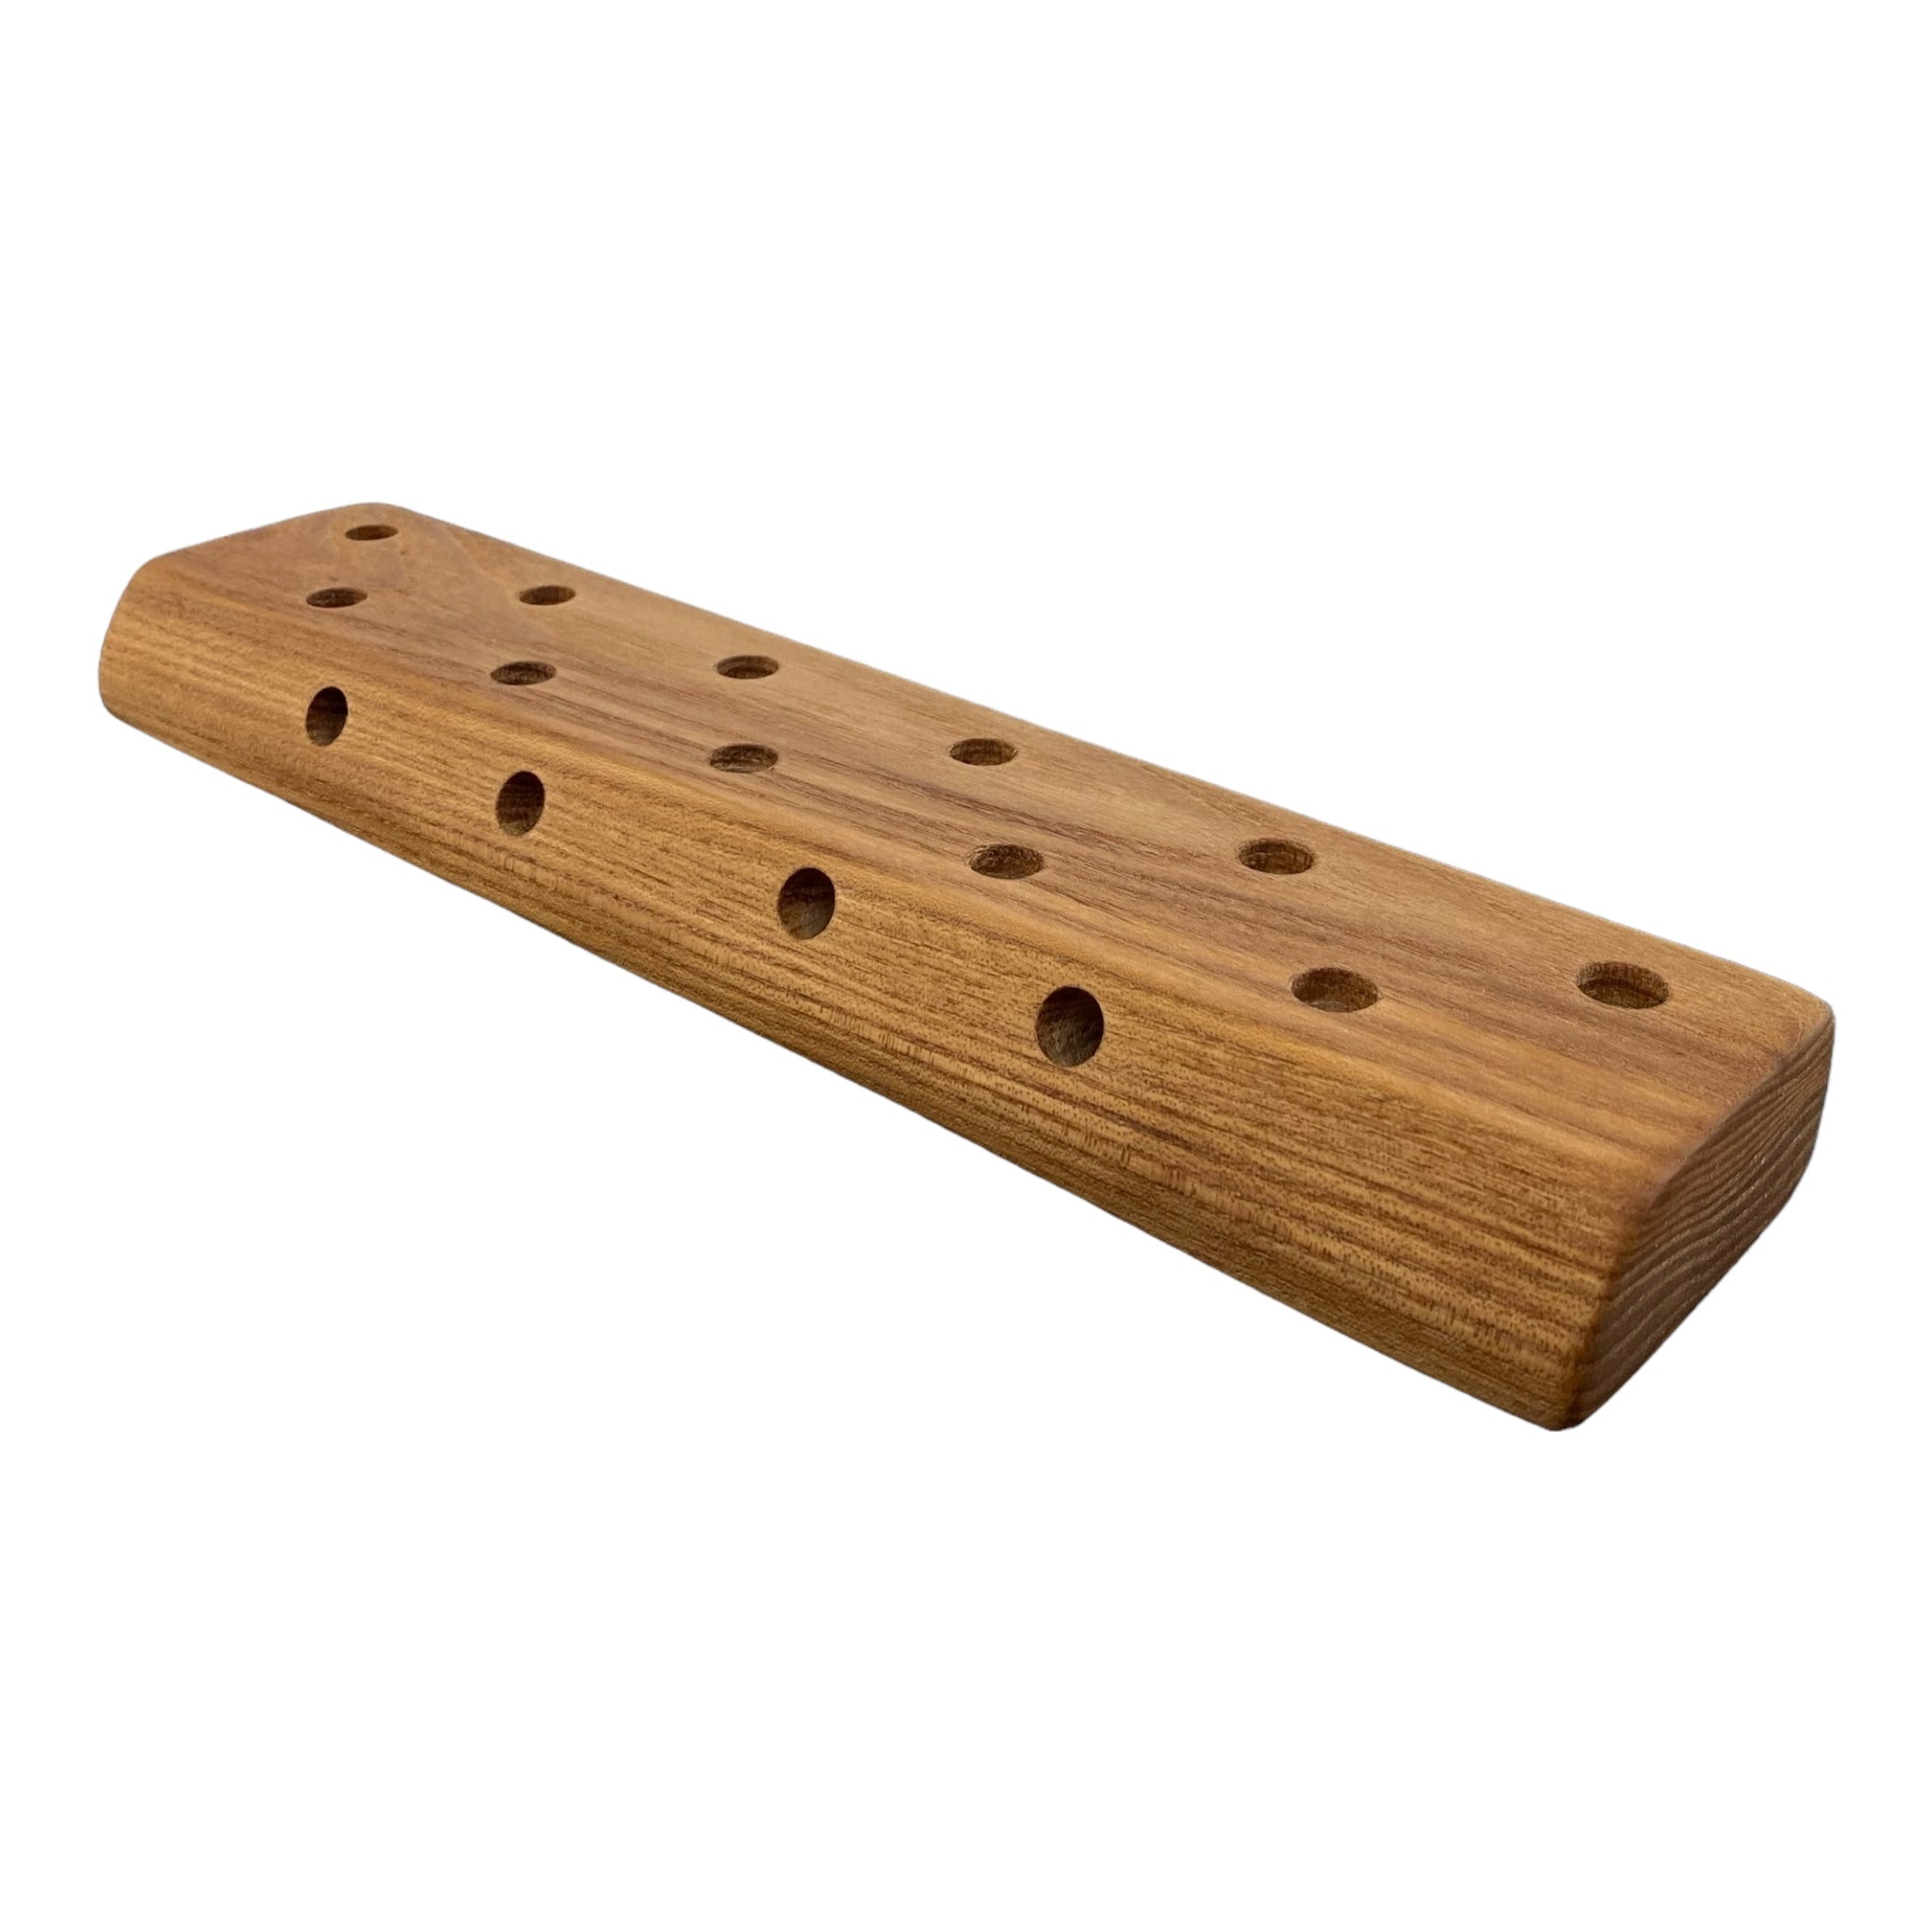 15 Hole Wood Display Stand Holder For 10mm Bong Bowl Pieces Or Quartz Bangers made from oak for sale